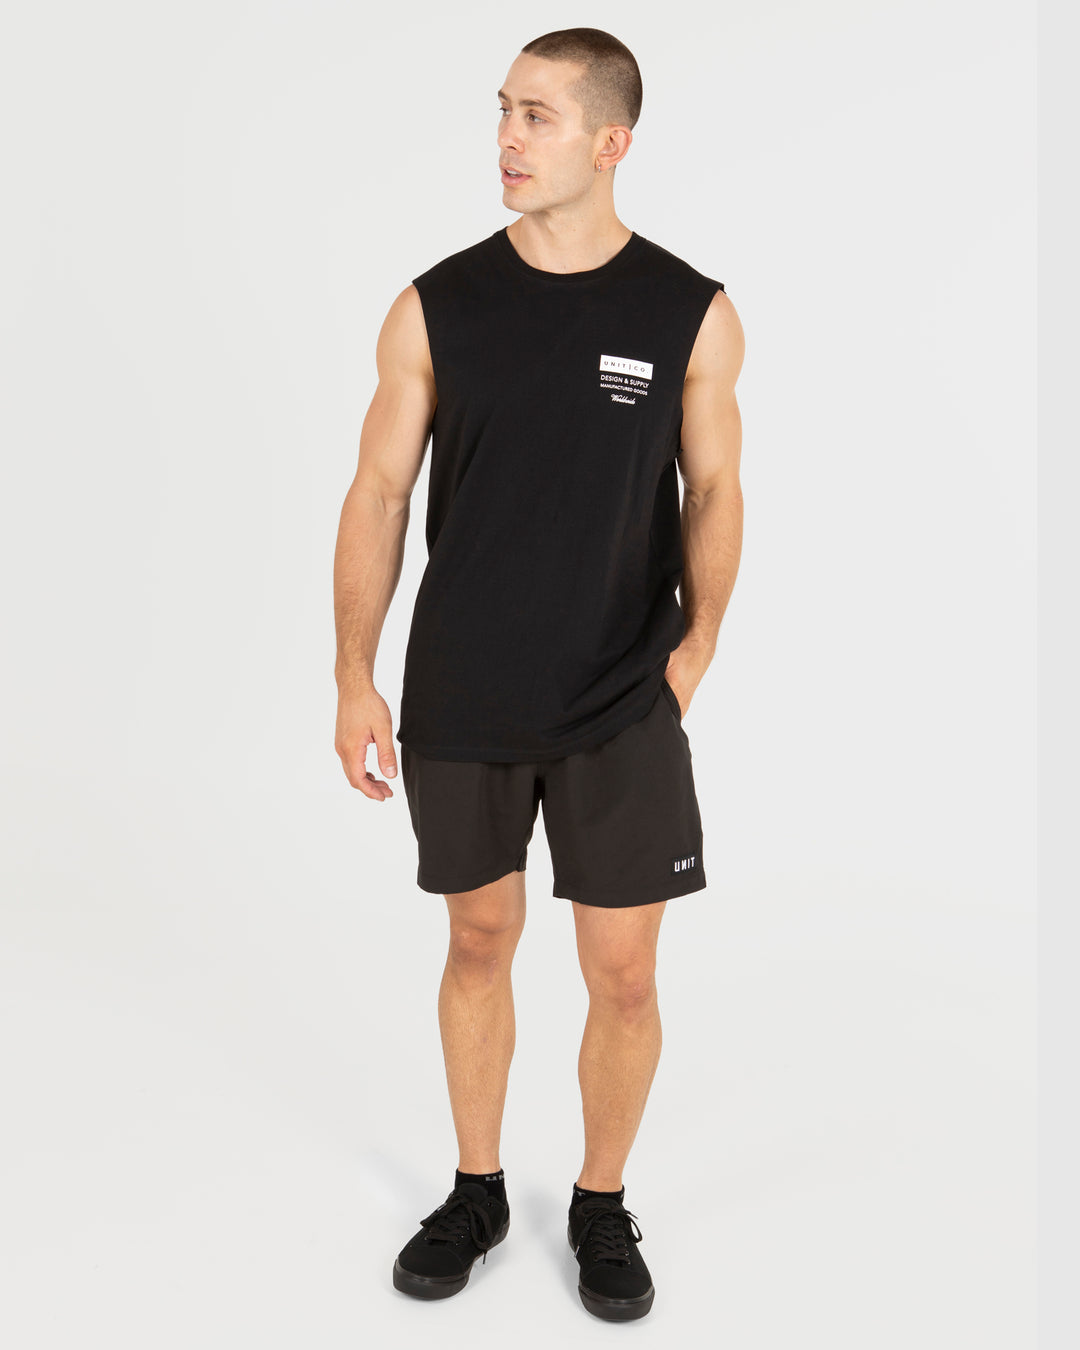 UNIT Mens Plate Muscle Tee